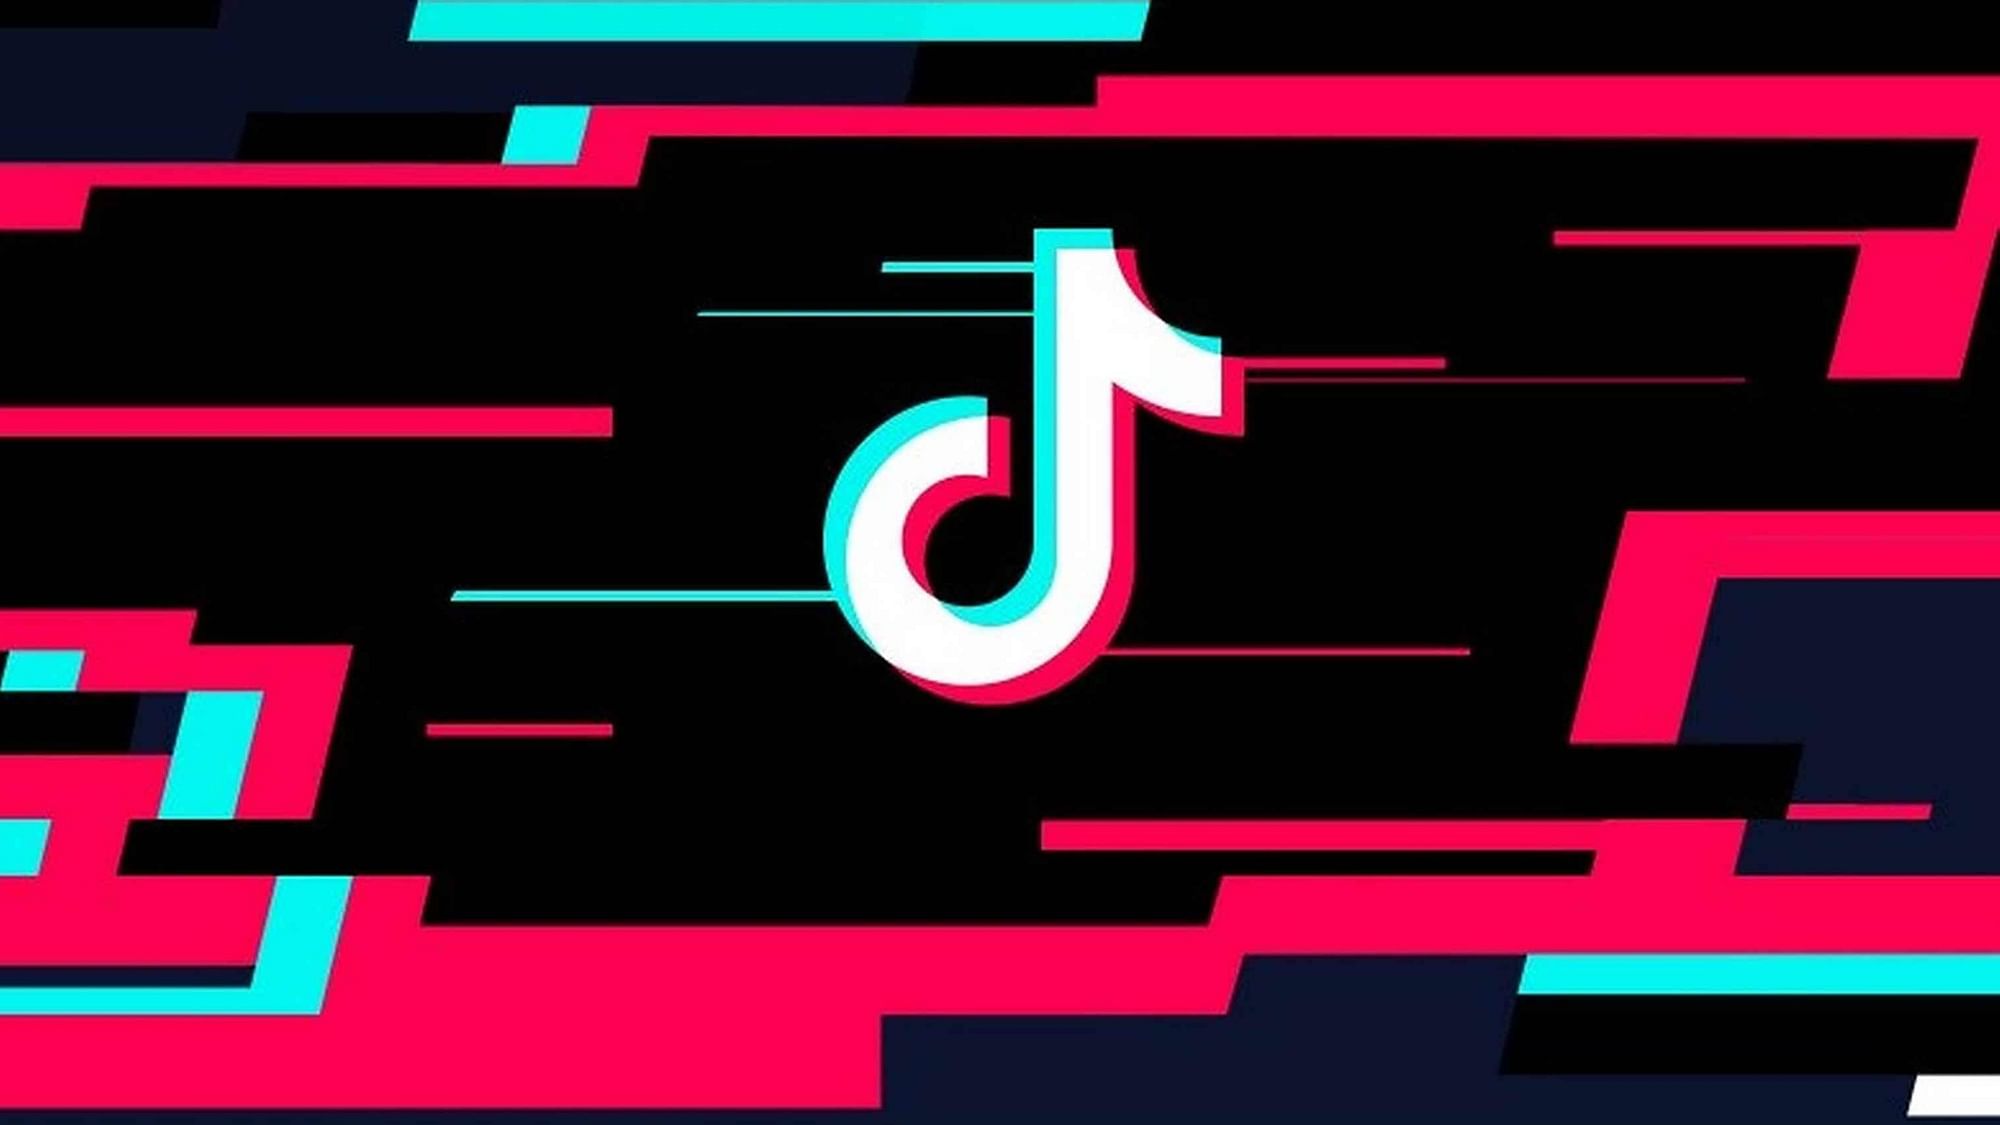 If things go as per the plan of the Tamil Nadu government, people of Tamil Nadu may not get to use one of their favourite apps – TikTok.